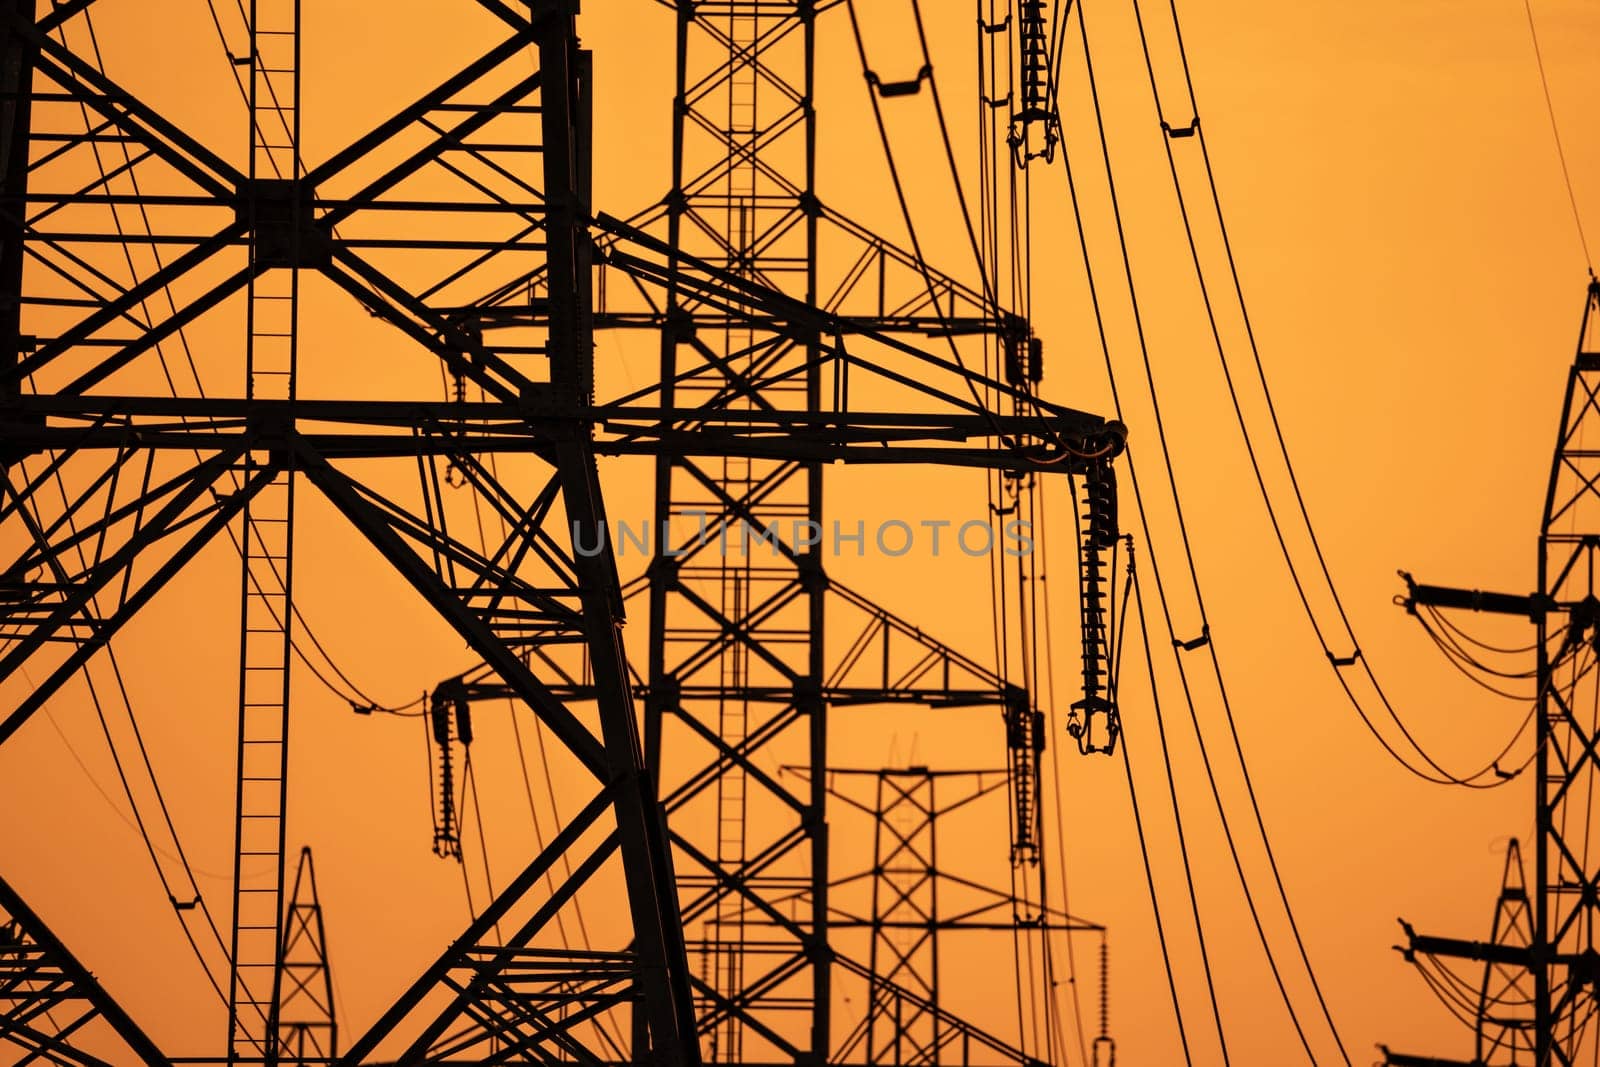 High voltage electric transmission tower. High voltage power lines on electric pylon against a sunset sky. Electrical infrastructure. Energy crisis. Electric power distribution. Energy distribution.